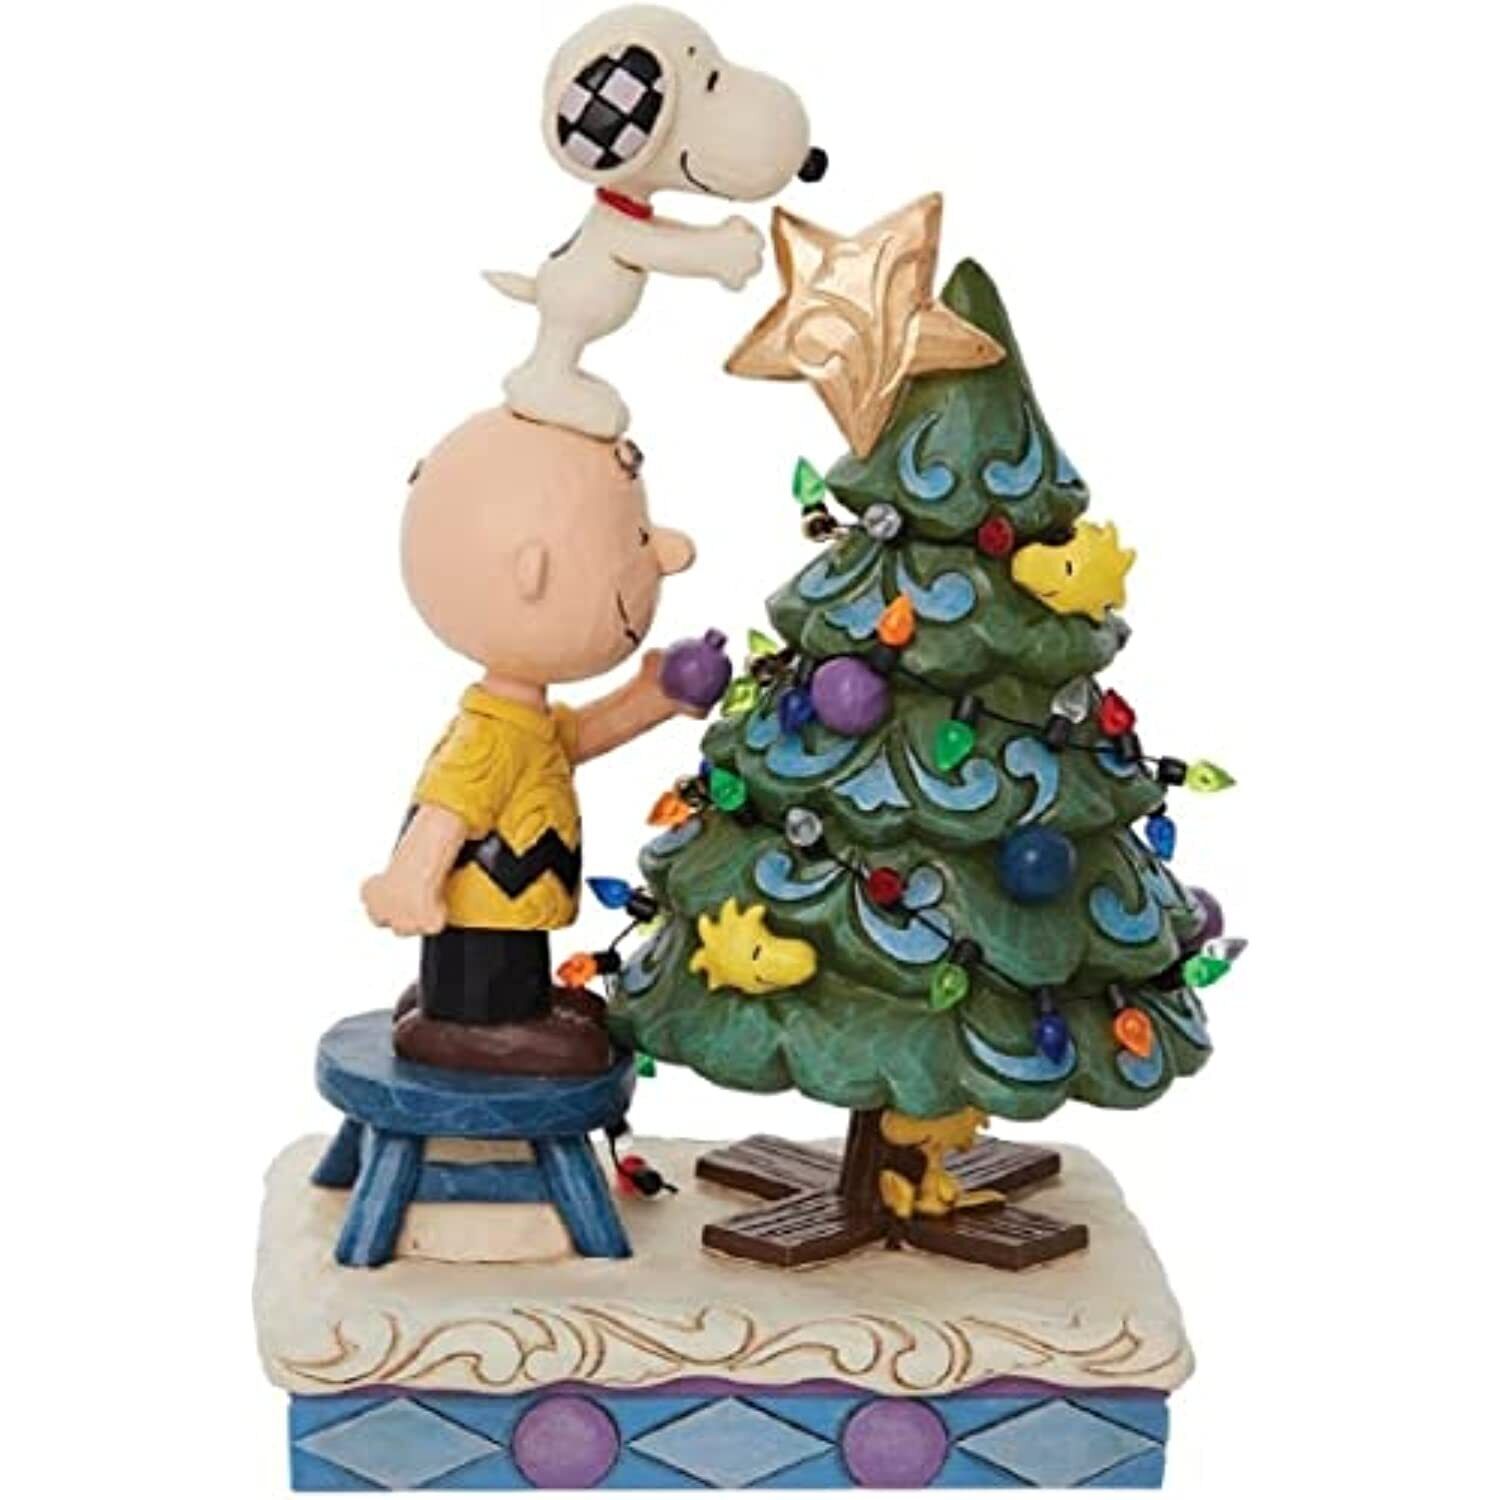 Jim Shore Peanuts Charlie Brown and Snoopy Decorating Figurine 8.4 inch 6010321